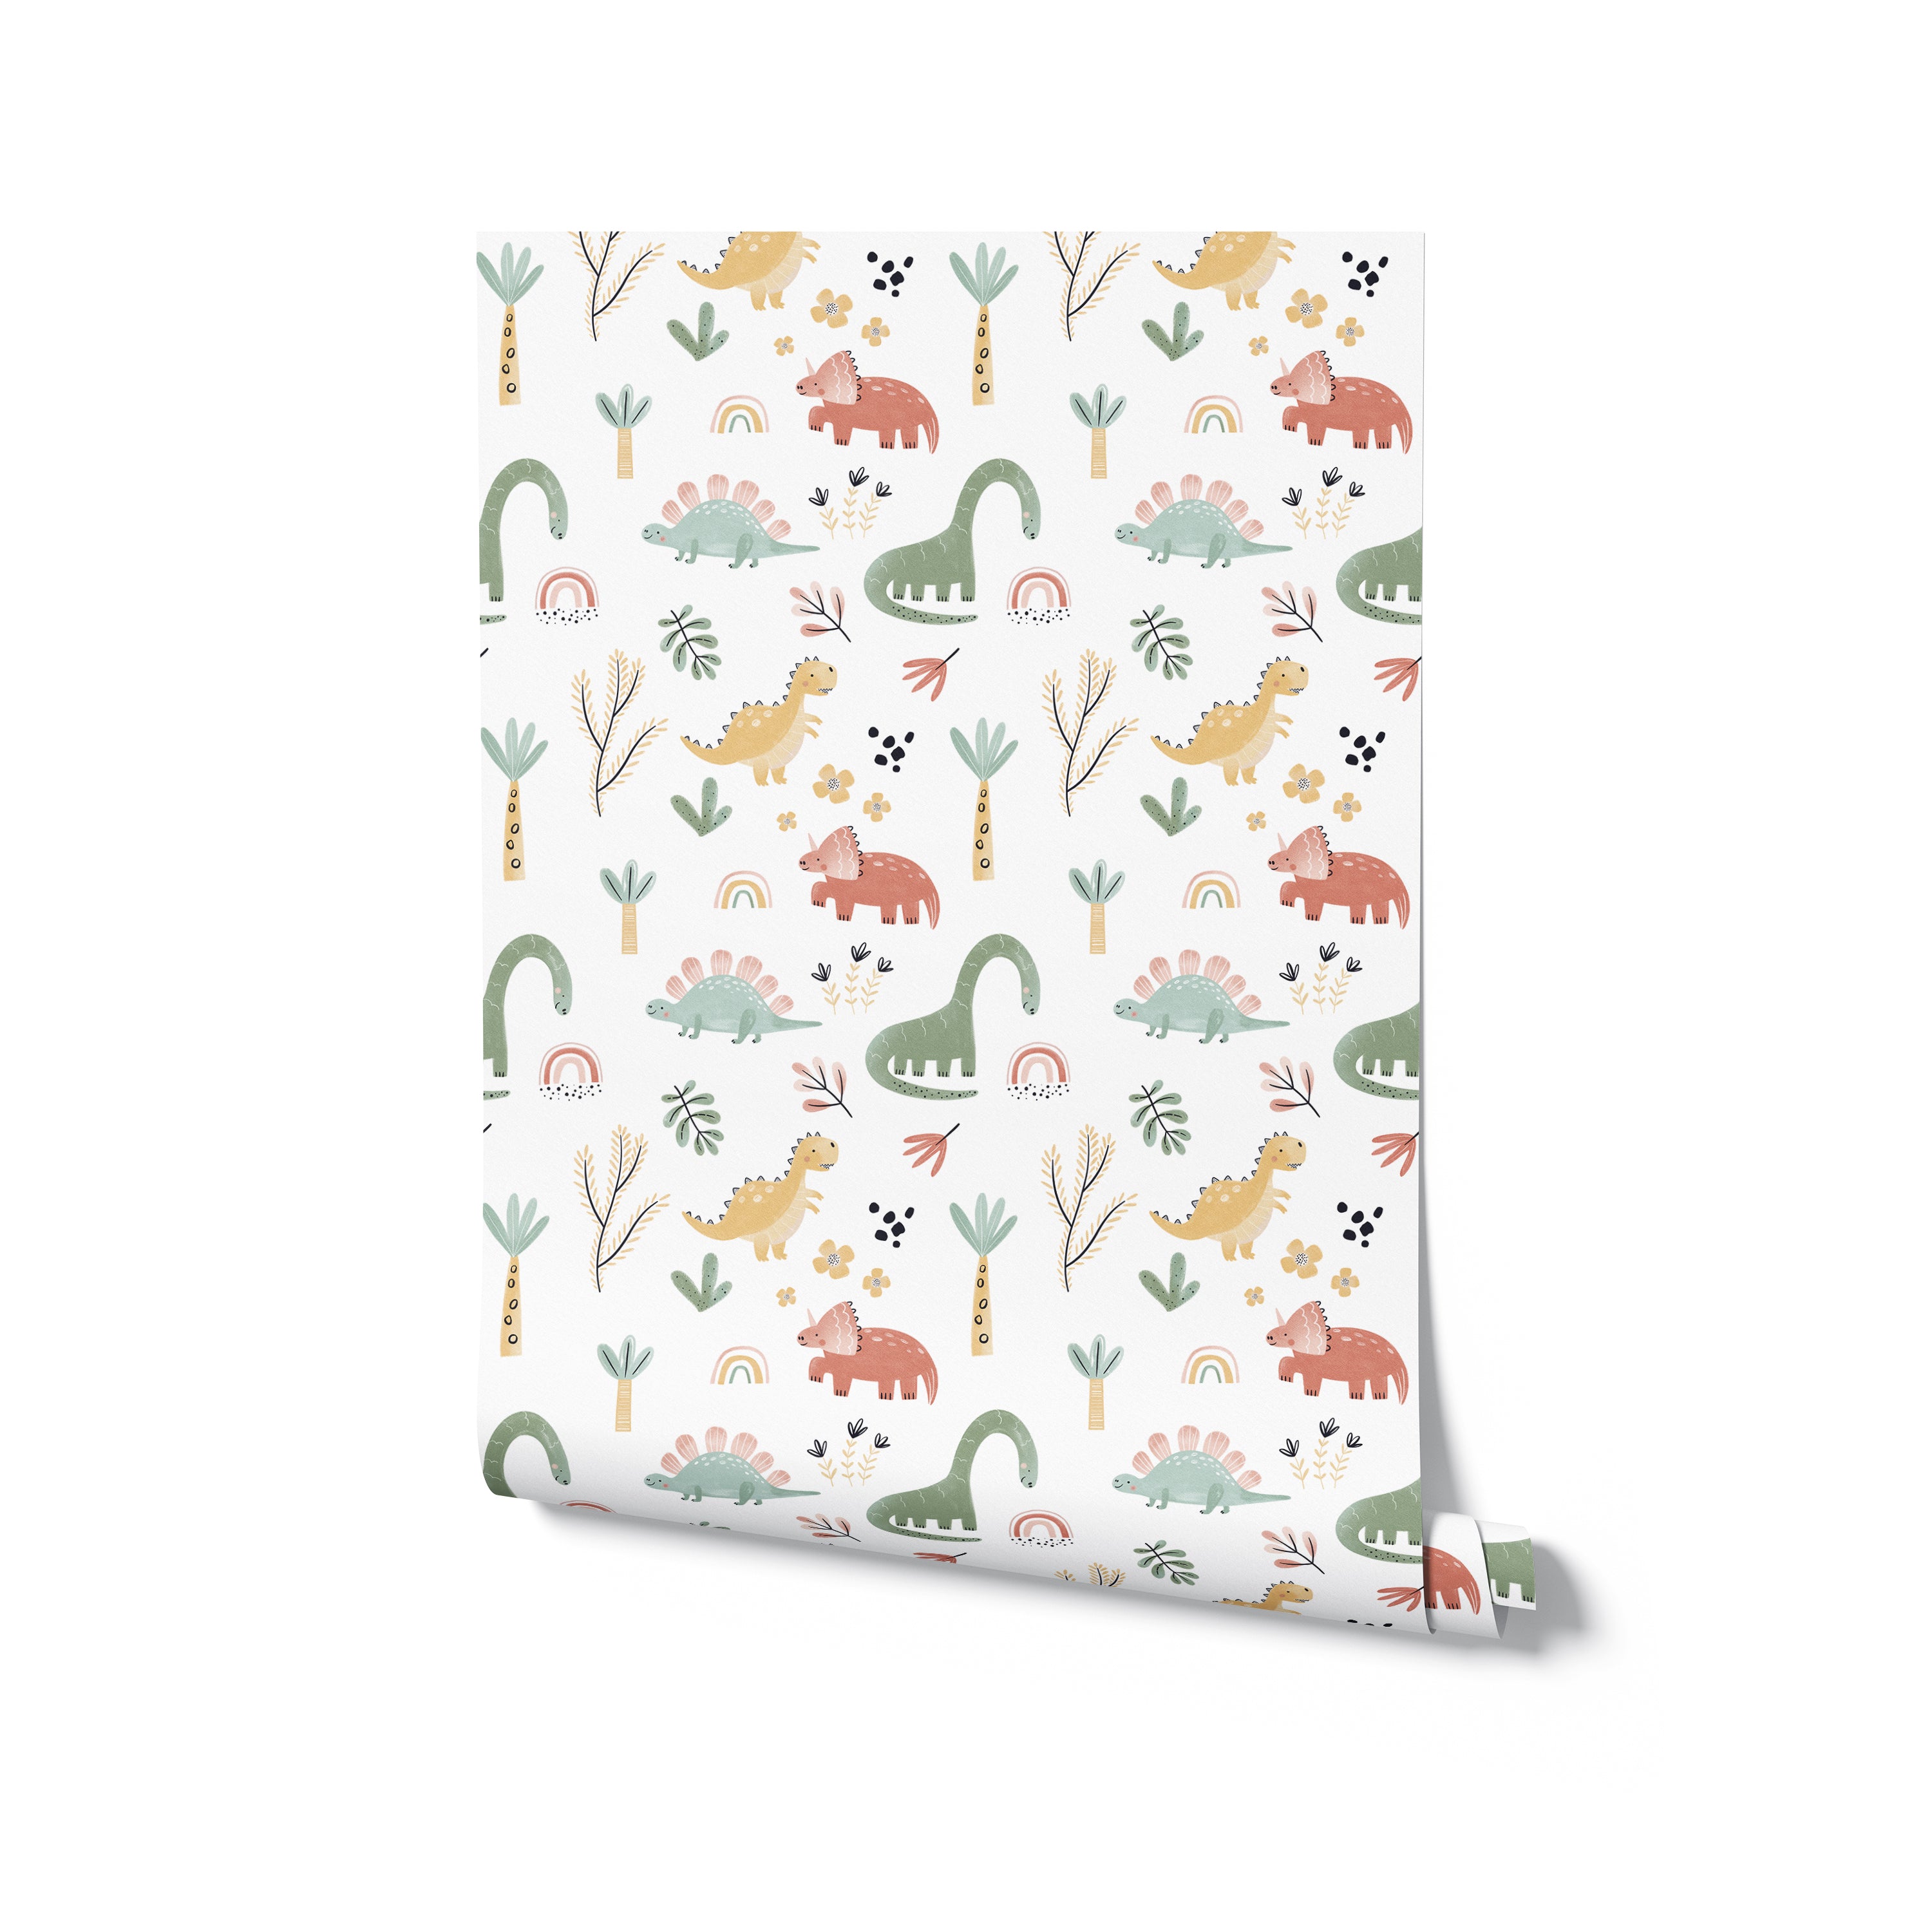 Rolled wallpaper depicting the Dinosaur Nursery design. This charming pattern showcases various dinosaurs and botanical motifs in a soft palette of greens, pinks, and yellows on a white background, perfect for adding a whimsical touch to any child’s nursery or bedroom.